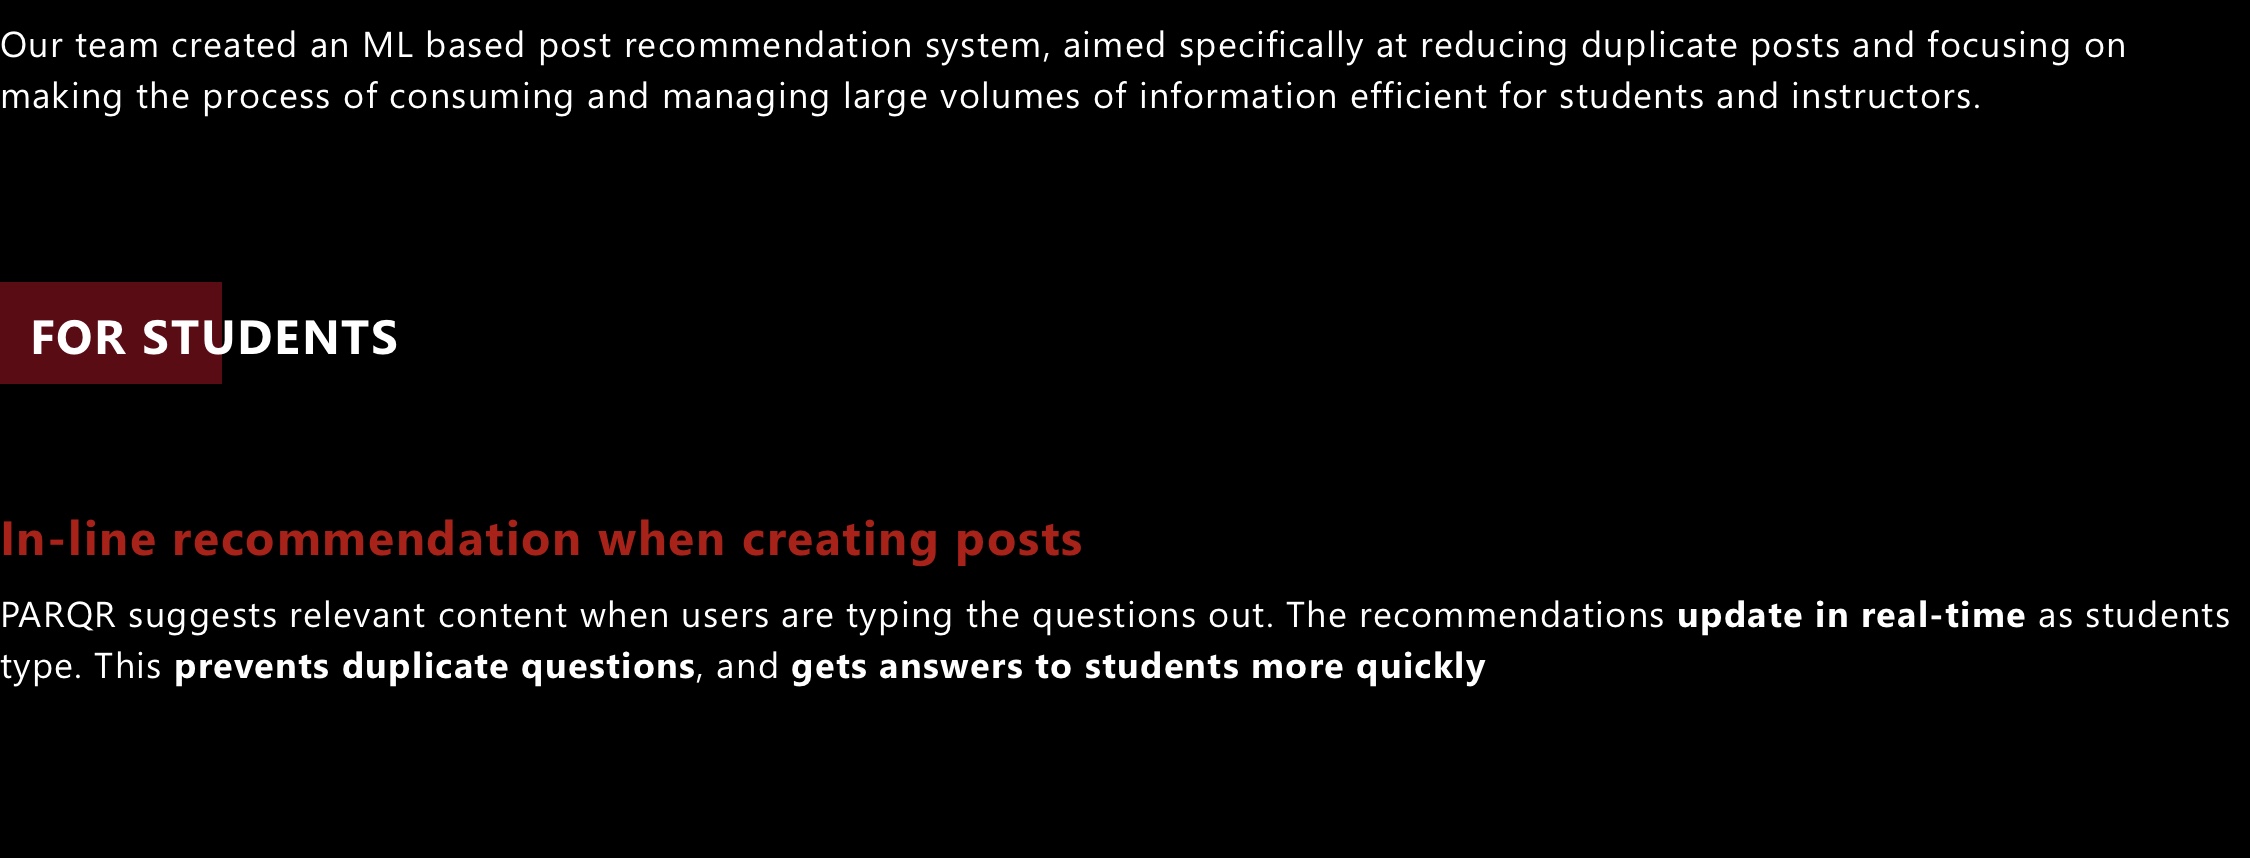 Our team created an ML based post recommendation system, aimed specifically at reducing duplicate posts and focusing on making the process of consuming and managing large volumes of information efficient for students and instructors.